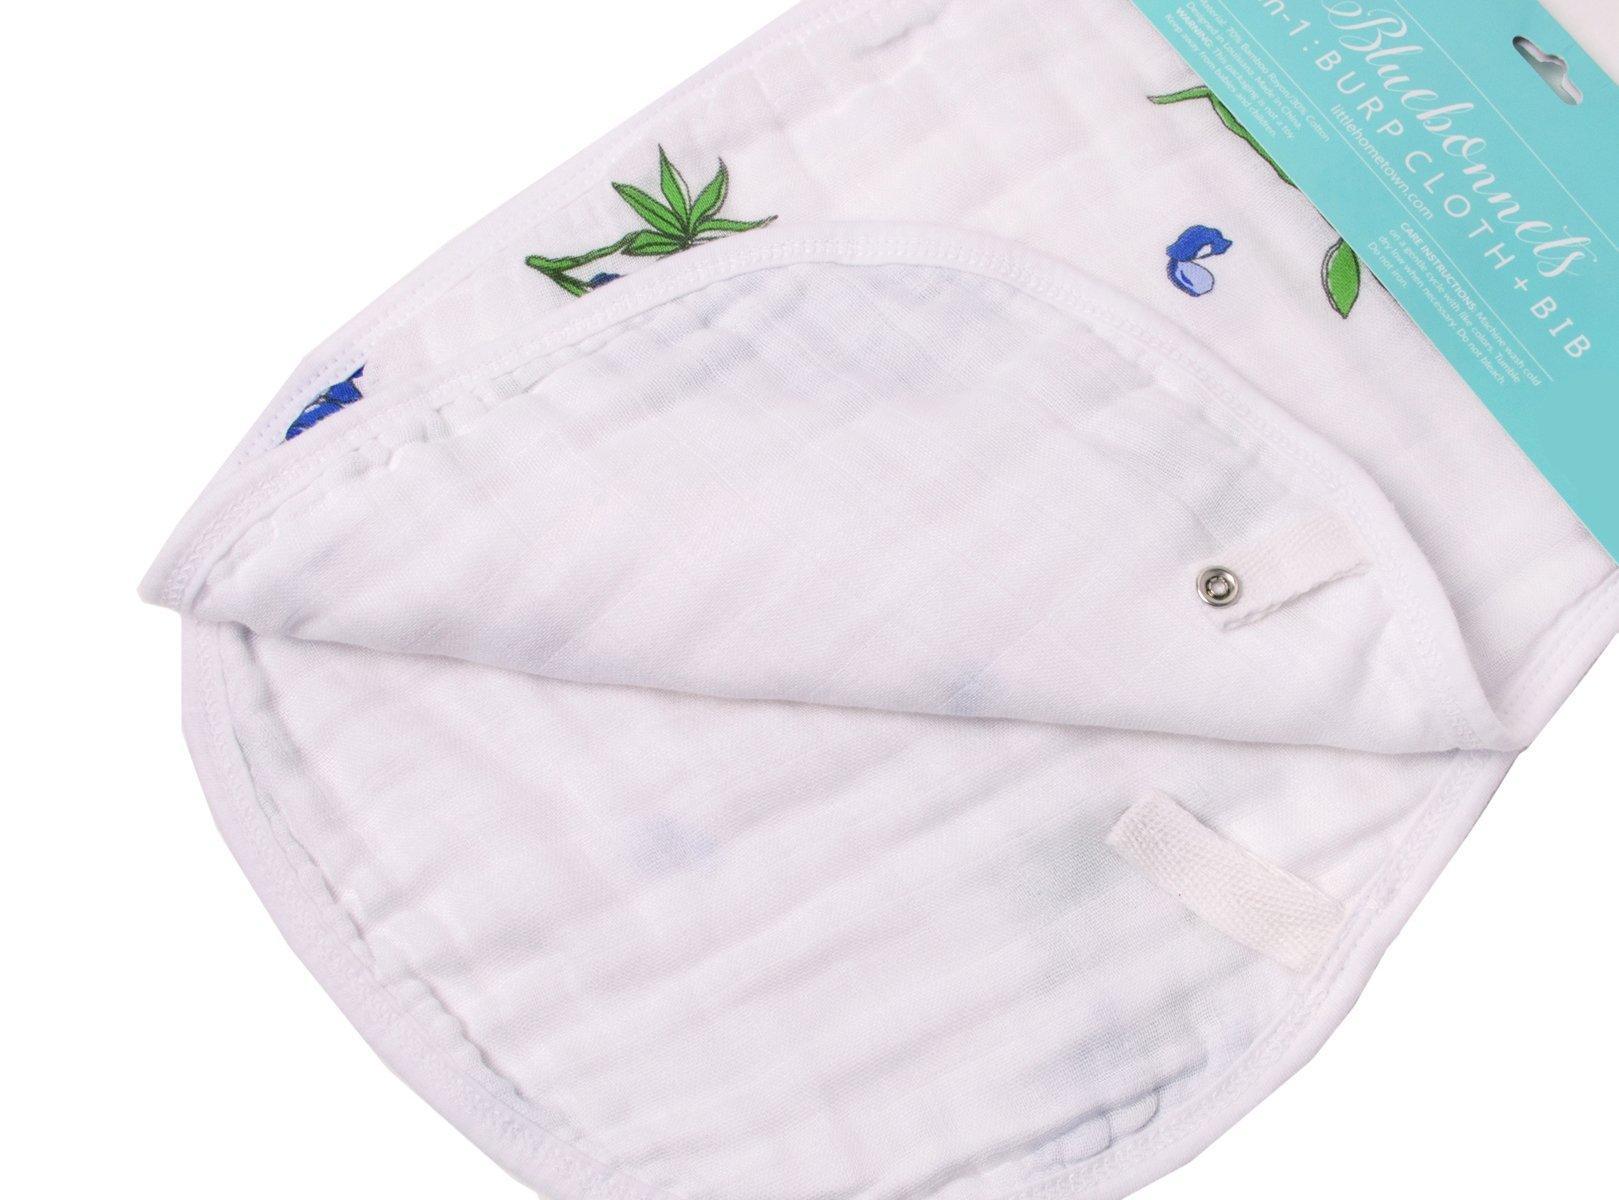 Bluebonnet-themed baby muslin swaddle blanket and burp cloth set, featuring delicate floral patterns on soft fabric.